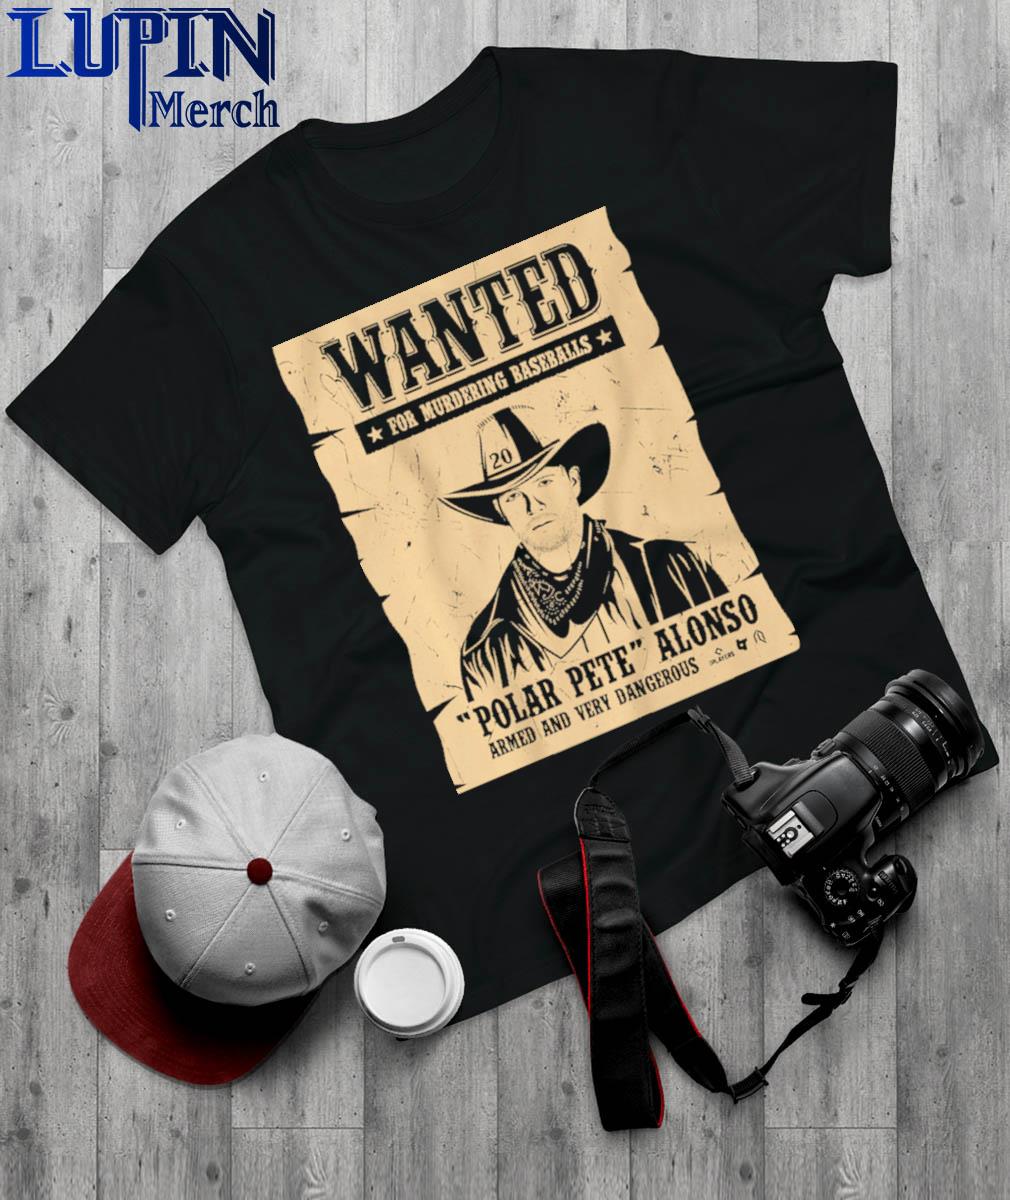 Wanted for murdering baseballs Pete alonso wanted poster t-shirt